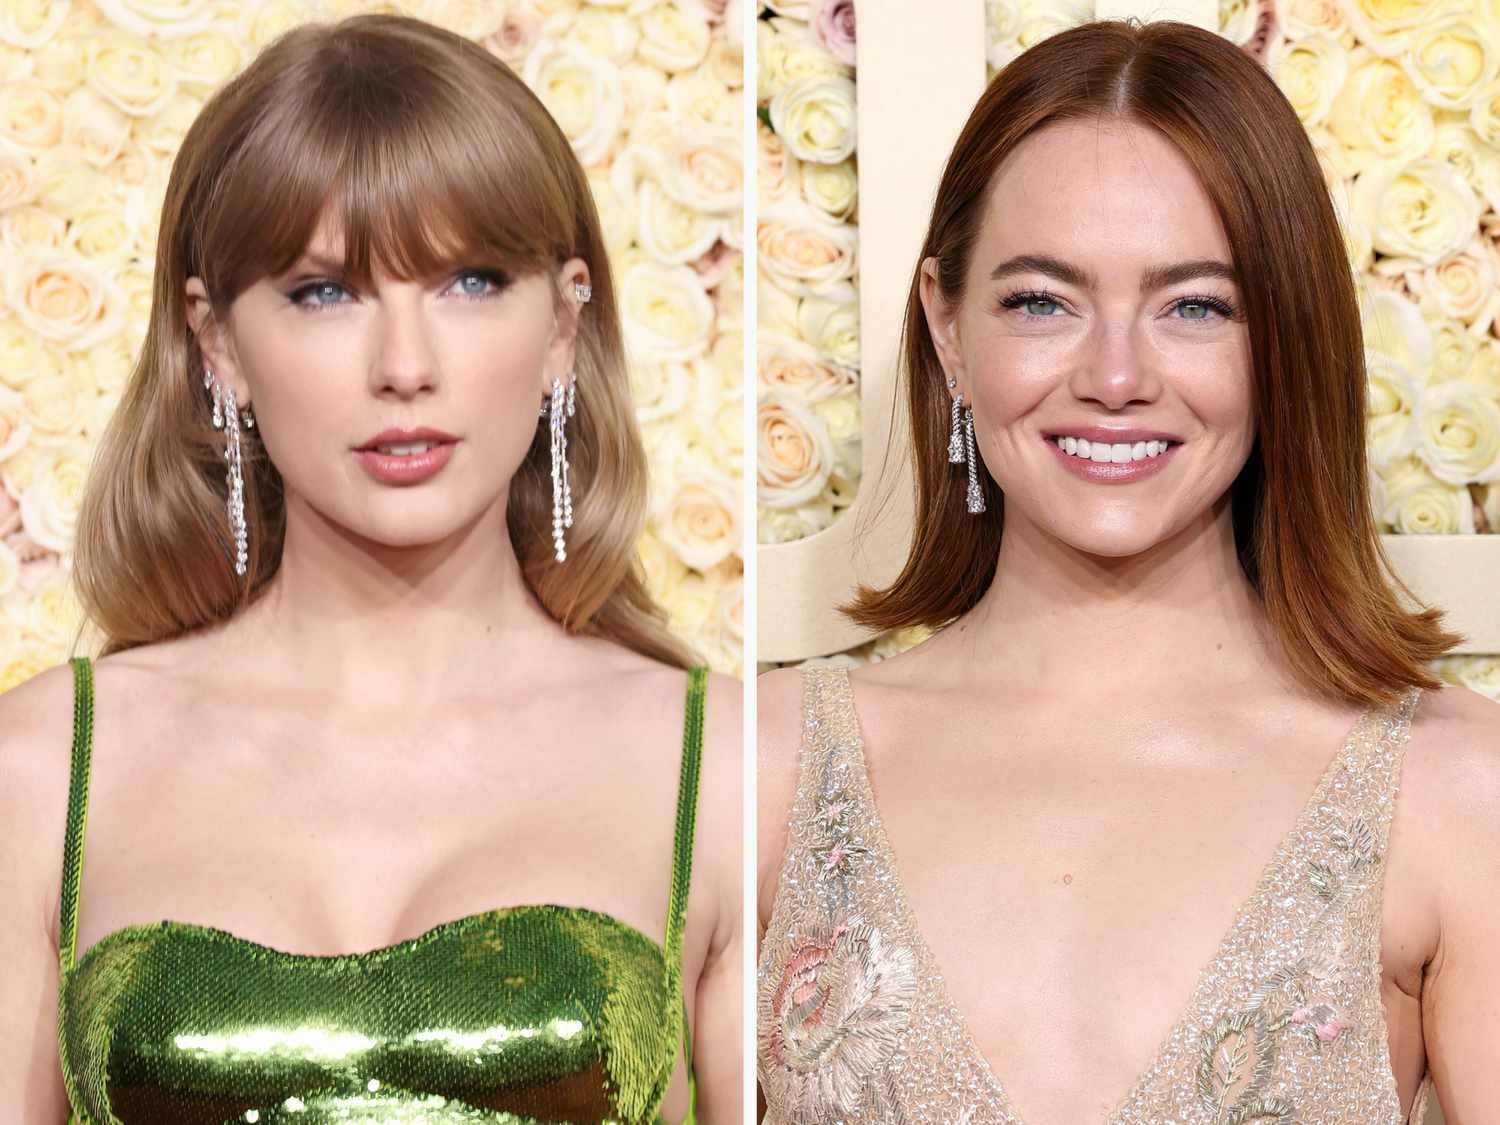 Emma Stone Not-So-Subtly Teased Taylor Swift at the Golden Globes